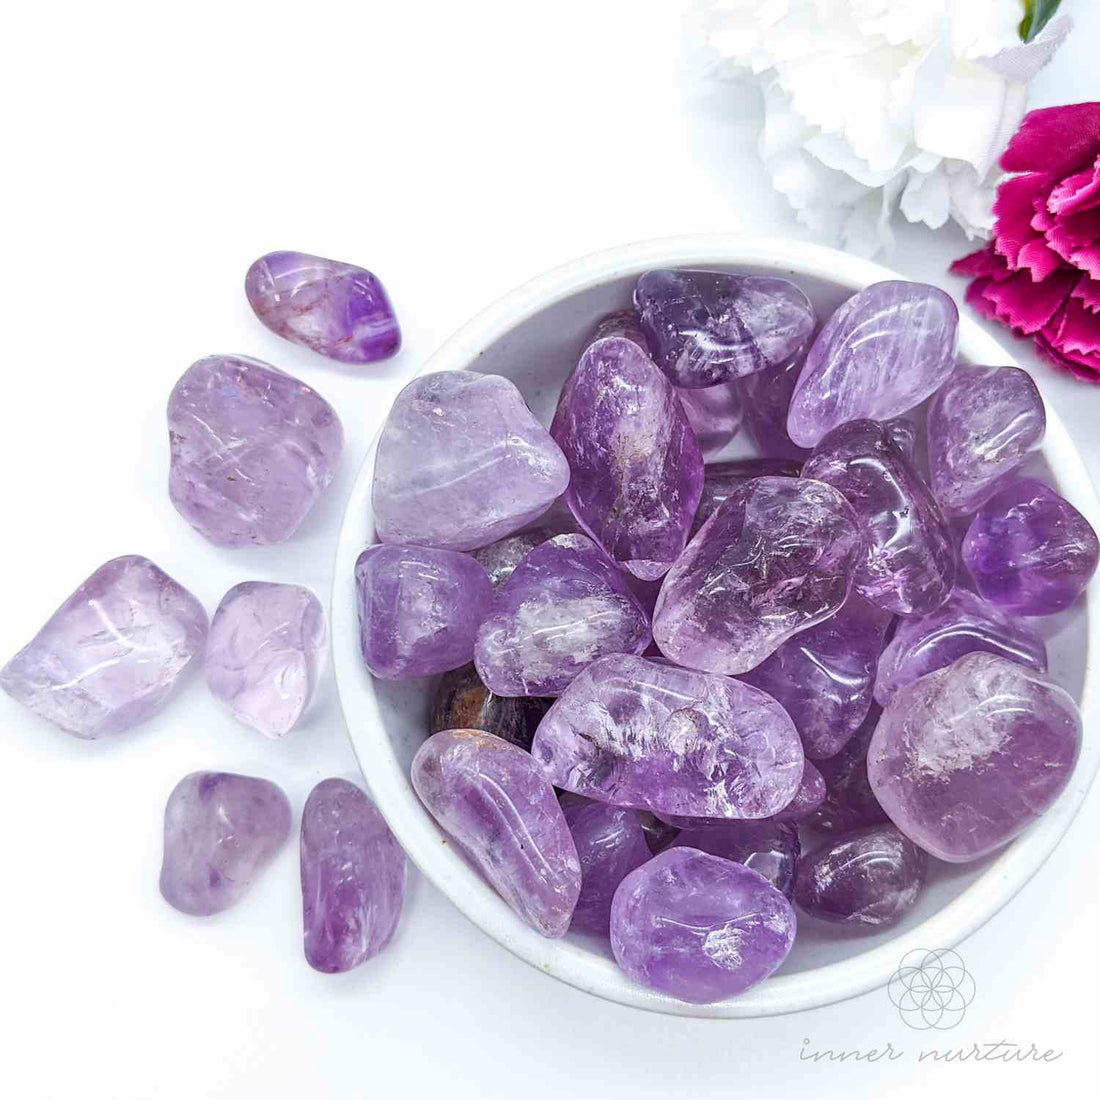 Raw vs Polished Stones: Which One Is Best For Energy Healing?